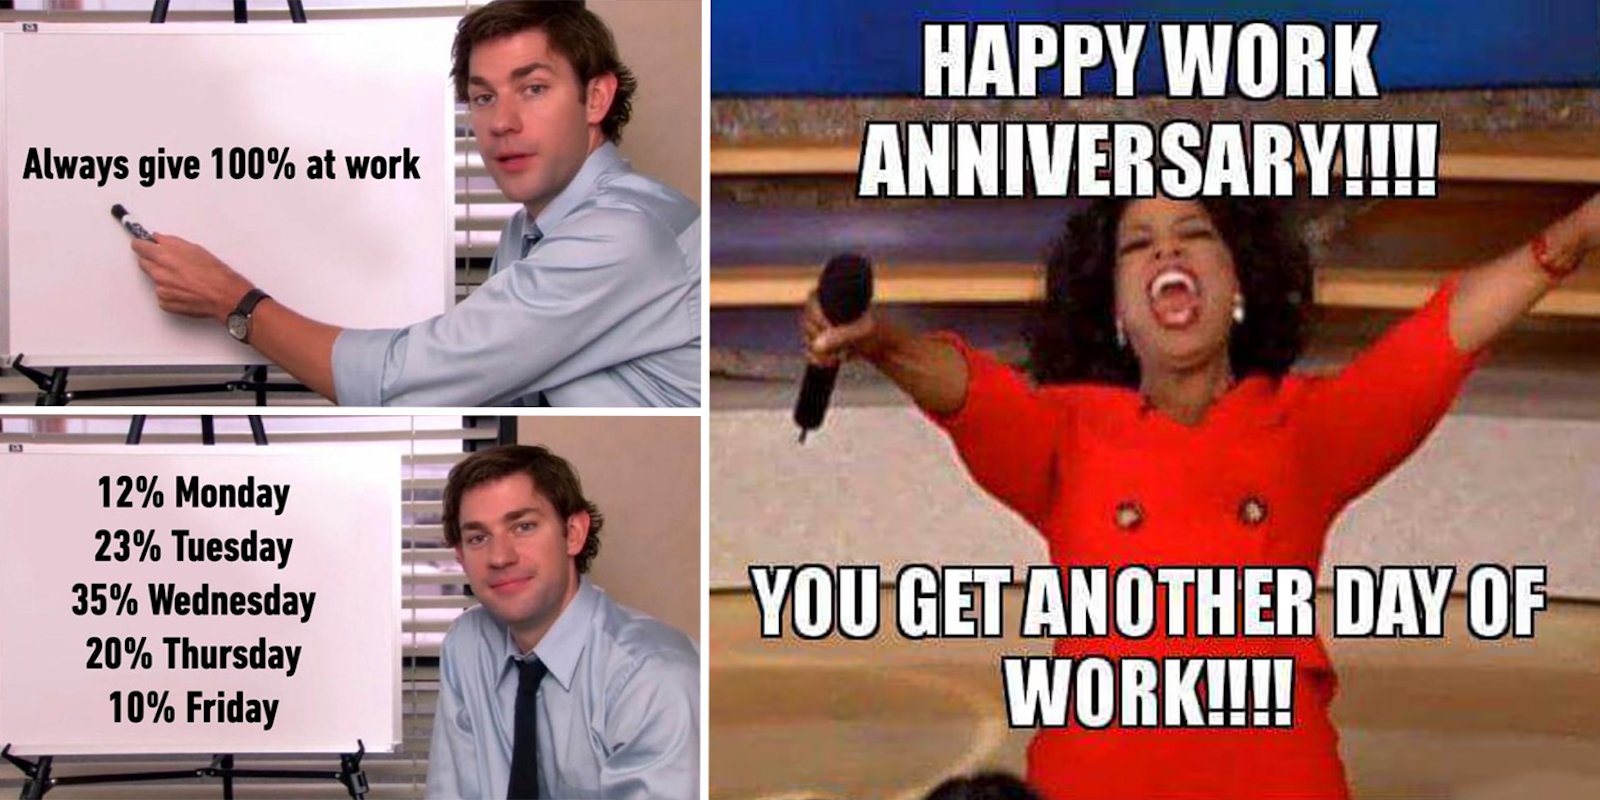 Hilarious Work Anniversary Memes to Share With Co-Workers